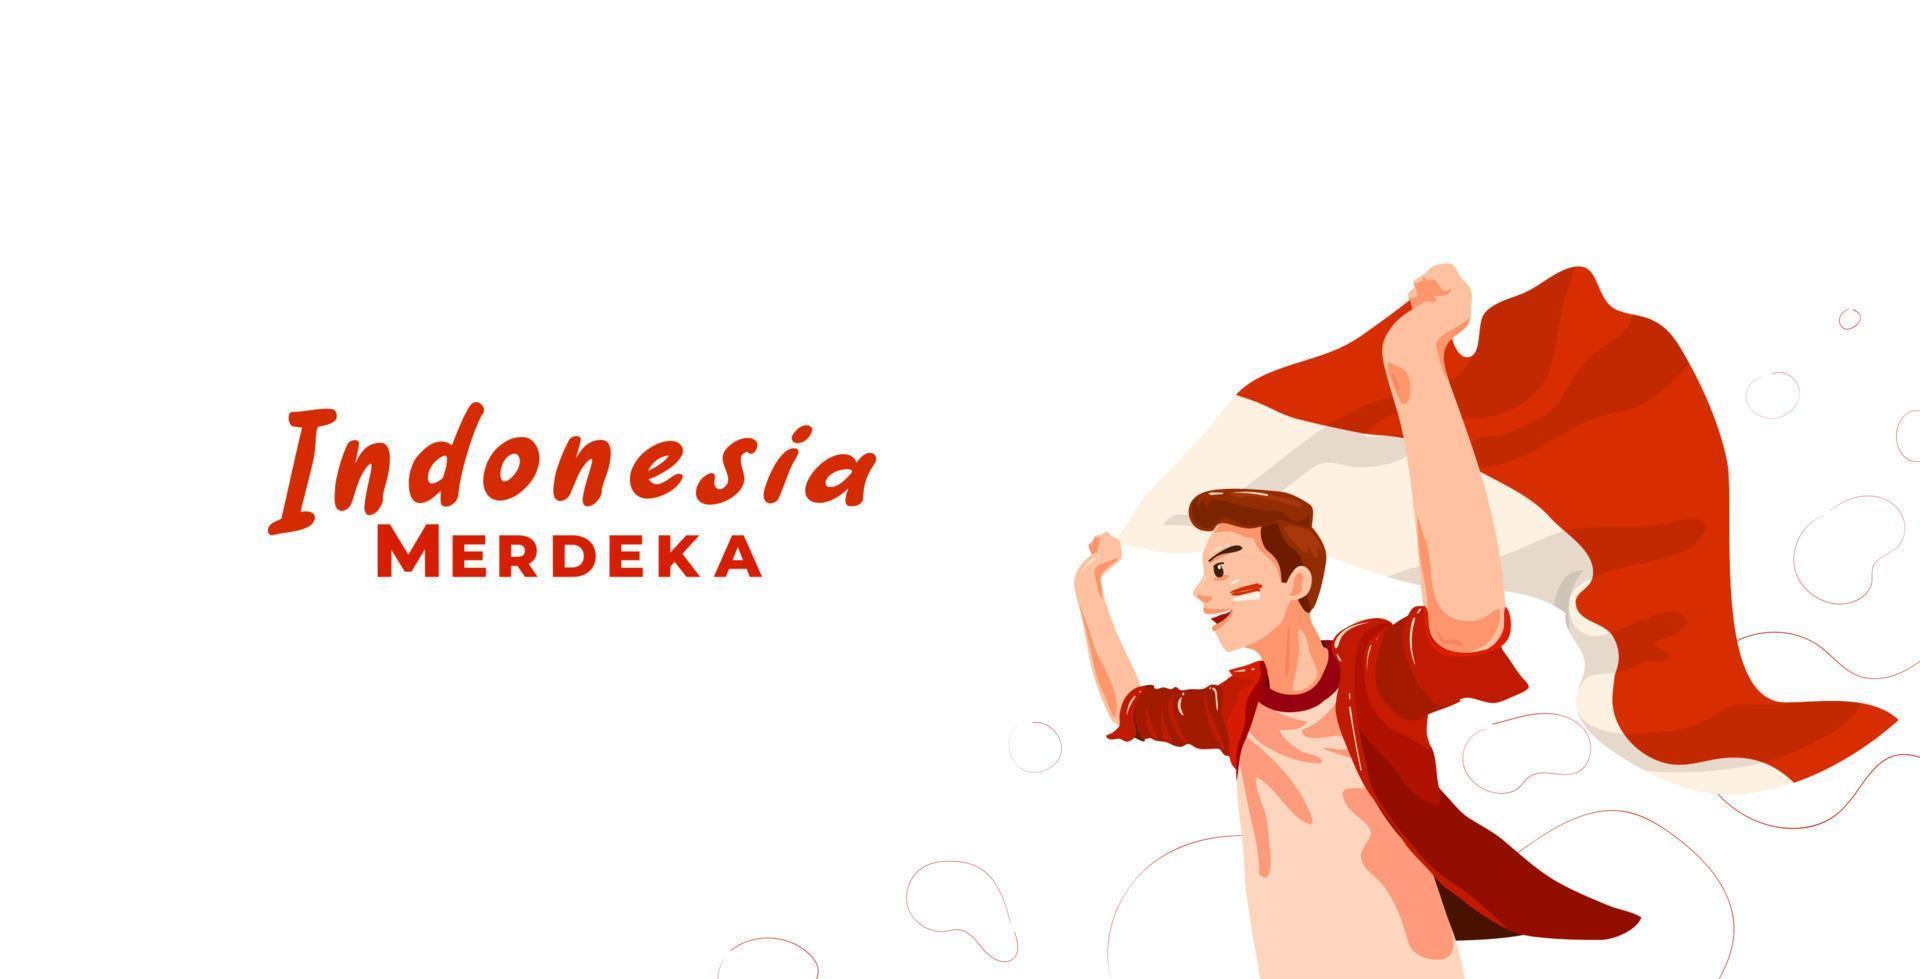 young indonesian celebrating indonesia independence day with waving flag. Merdeka translates to independence or freedom or independent vector